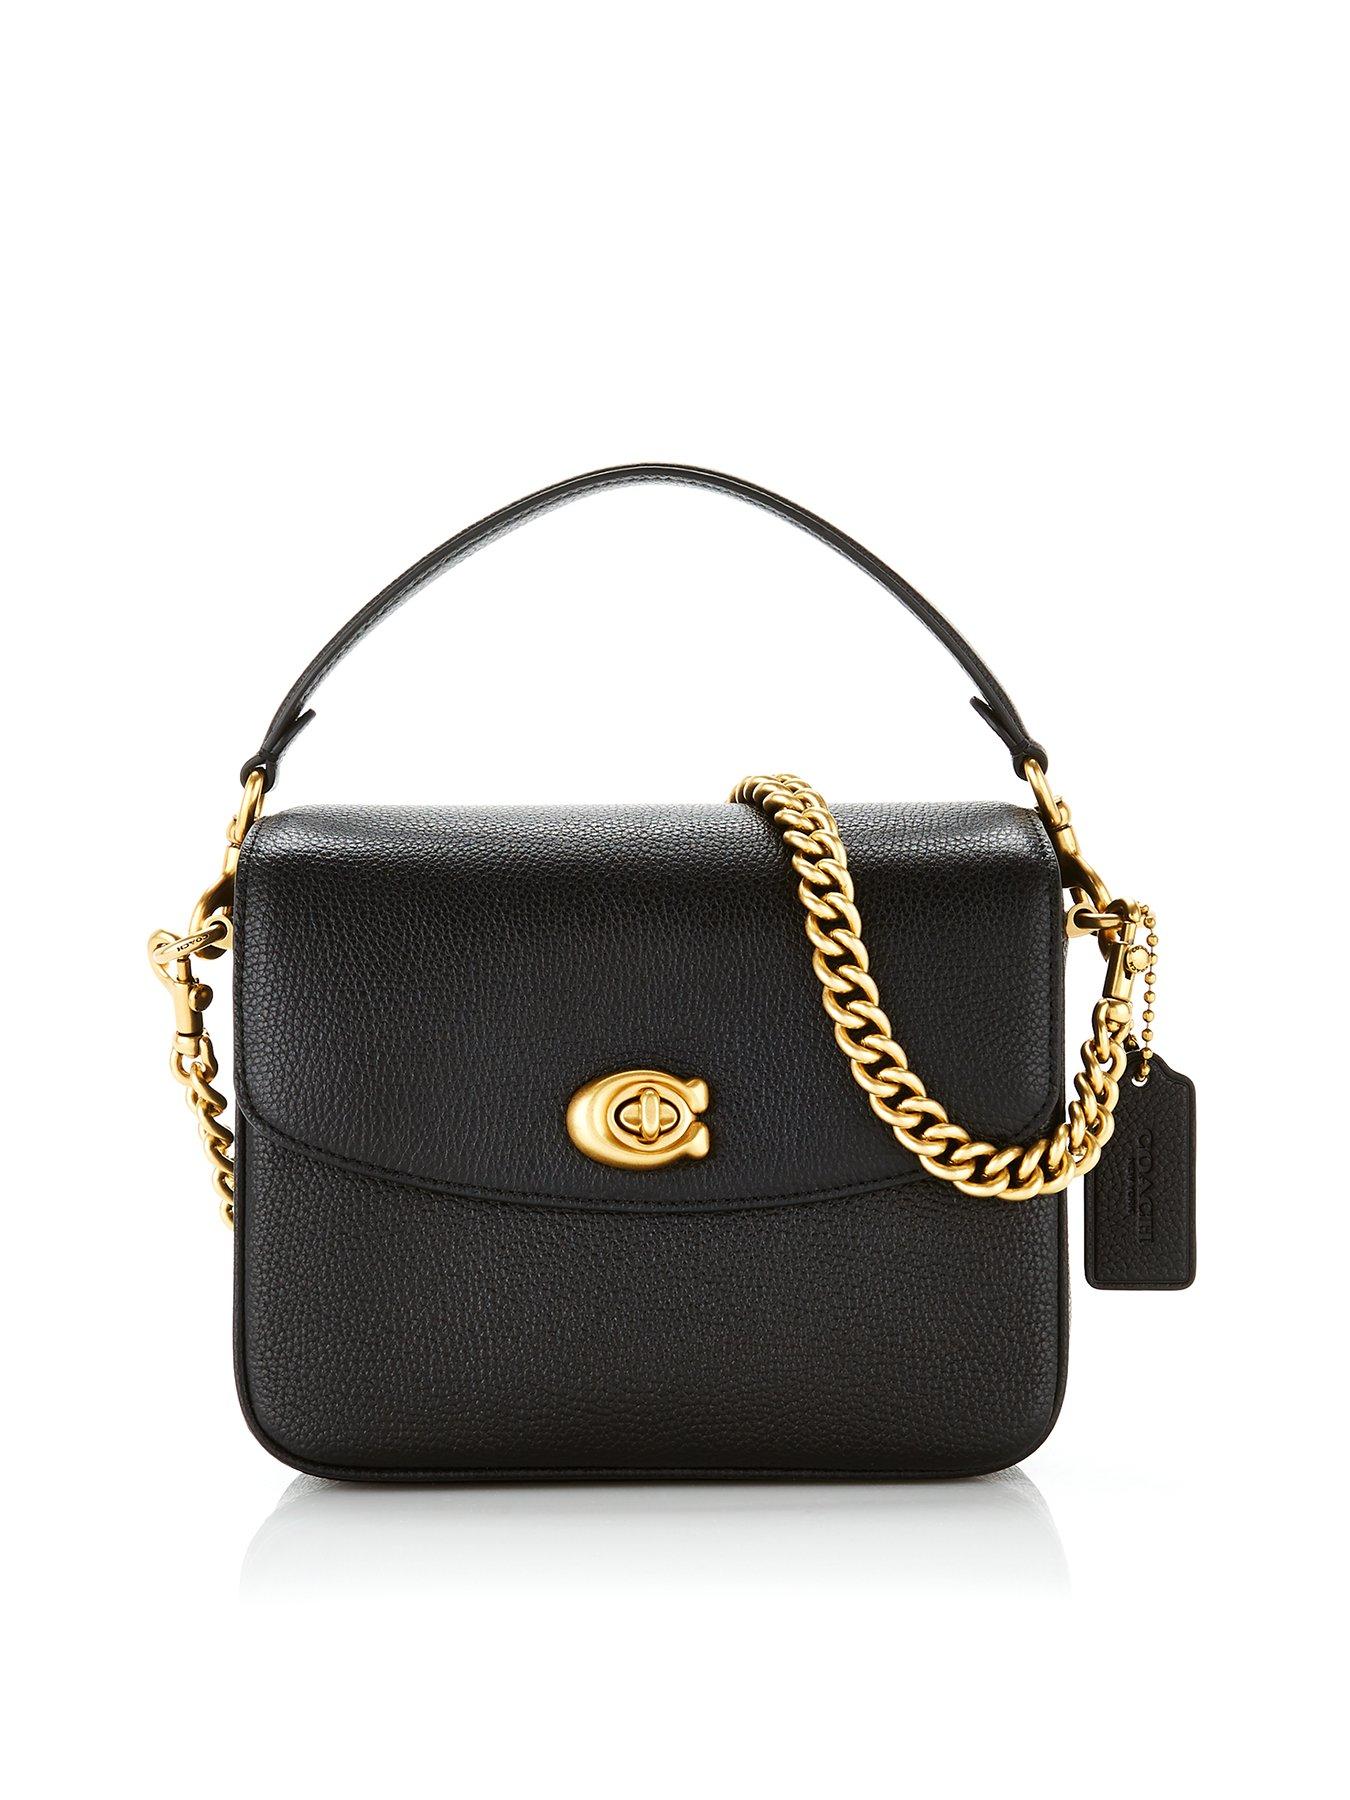 COACH Cassie 19 Polished Pebble Leather Cross-body Bag - Black | very.co.uk